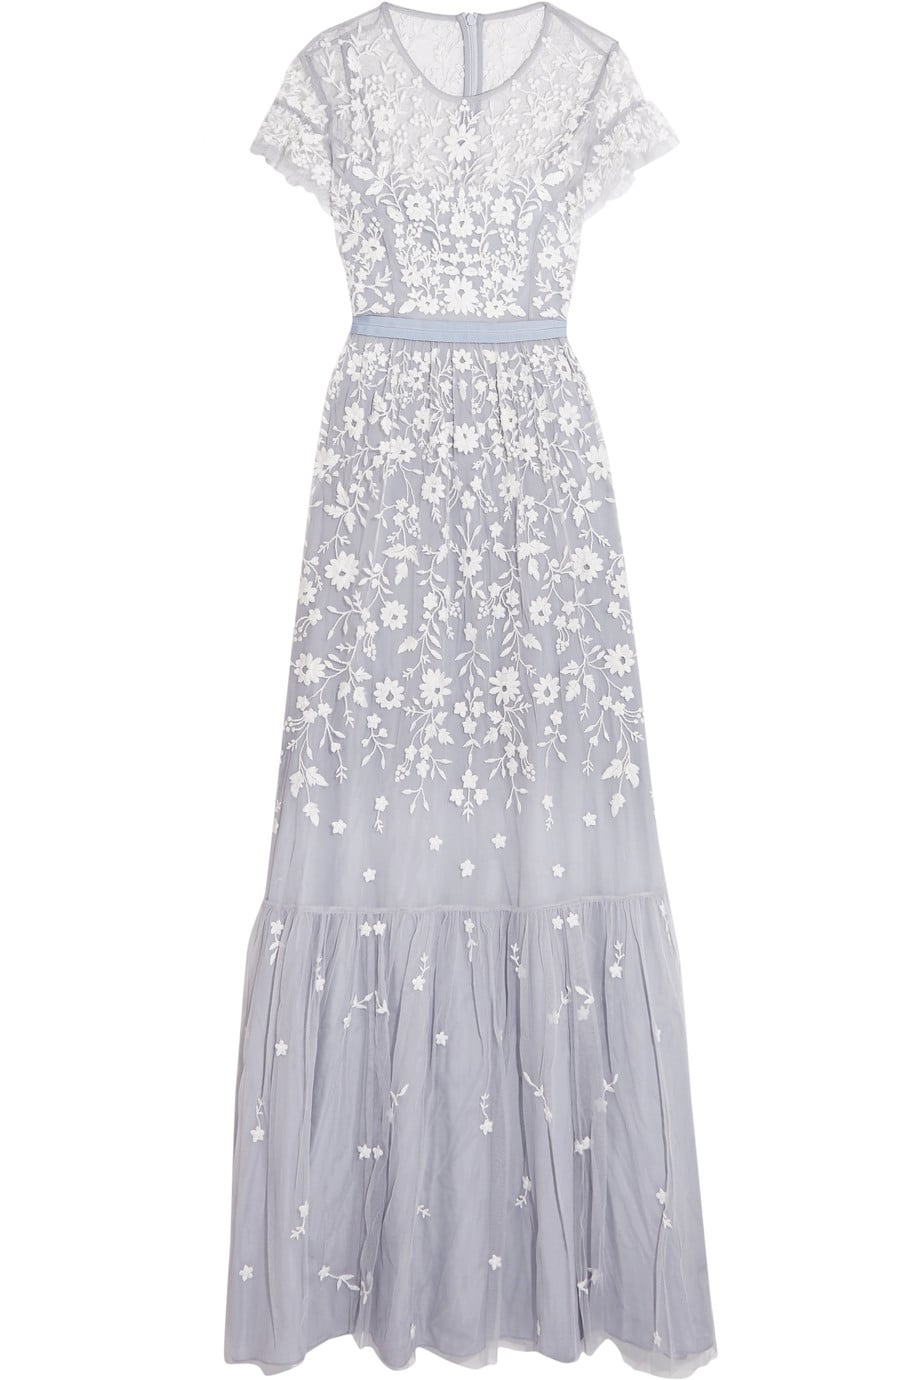 Needle Thread Dress Kate Middleton Channeled Disney S Elsa For The Night In This Icy Blue Dress Popsugar Fashion Photo 8